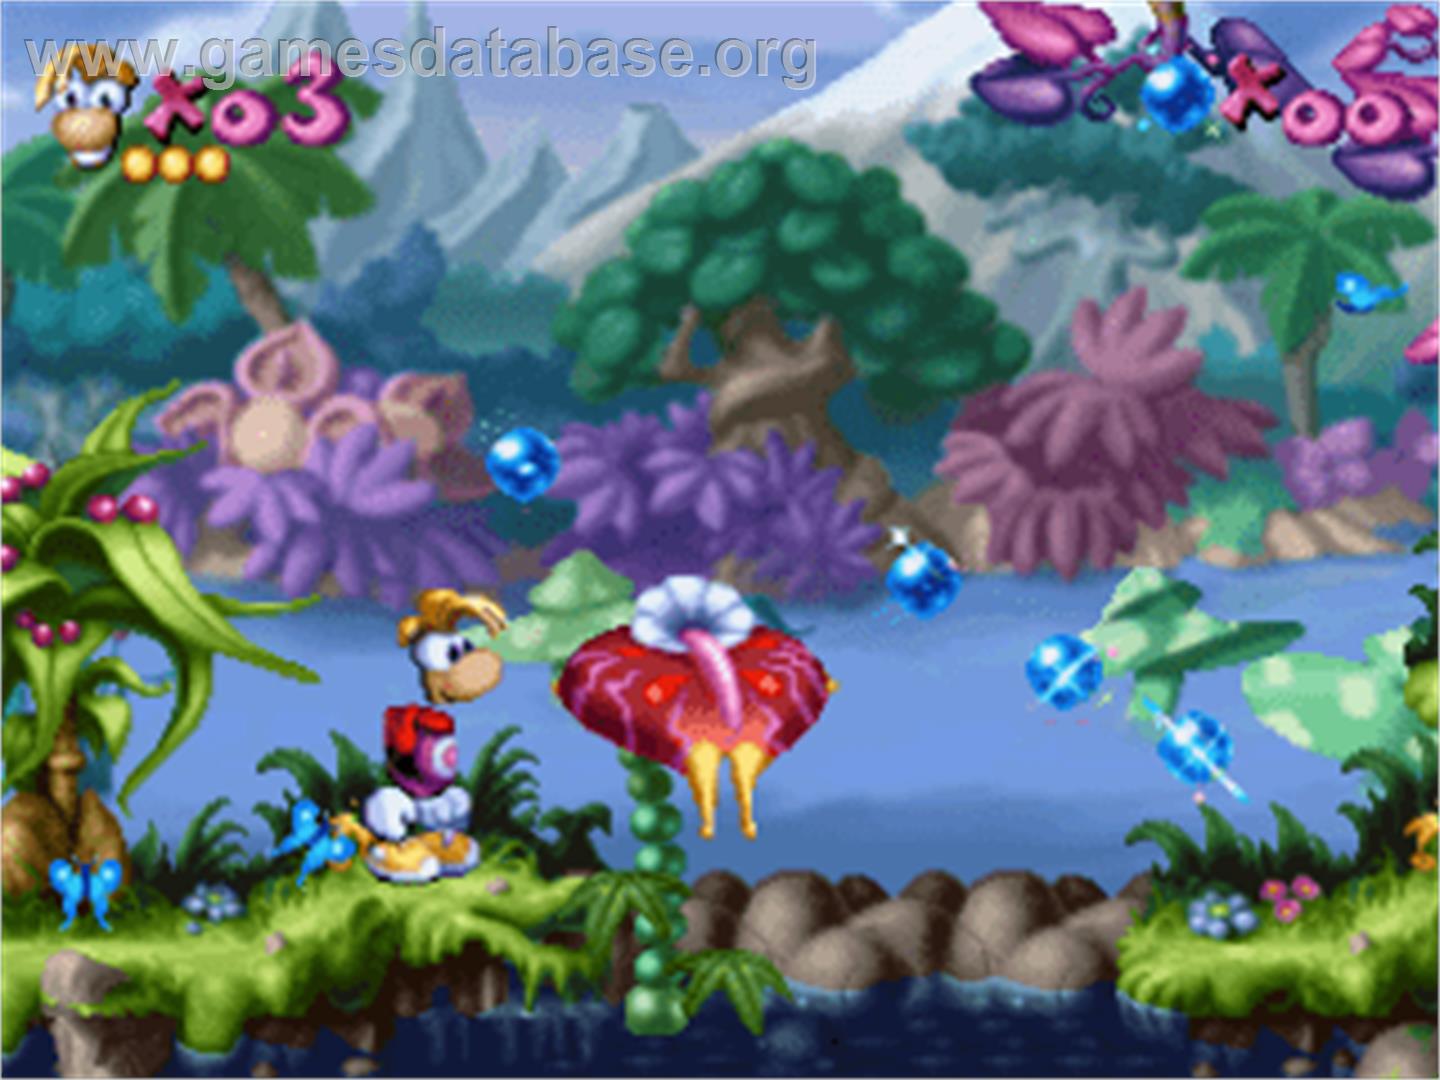 Rayman / Rayman 2: The Great Escape - Sony Playstation - Artwork - In Game